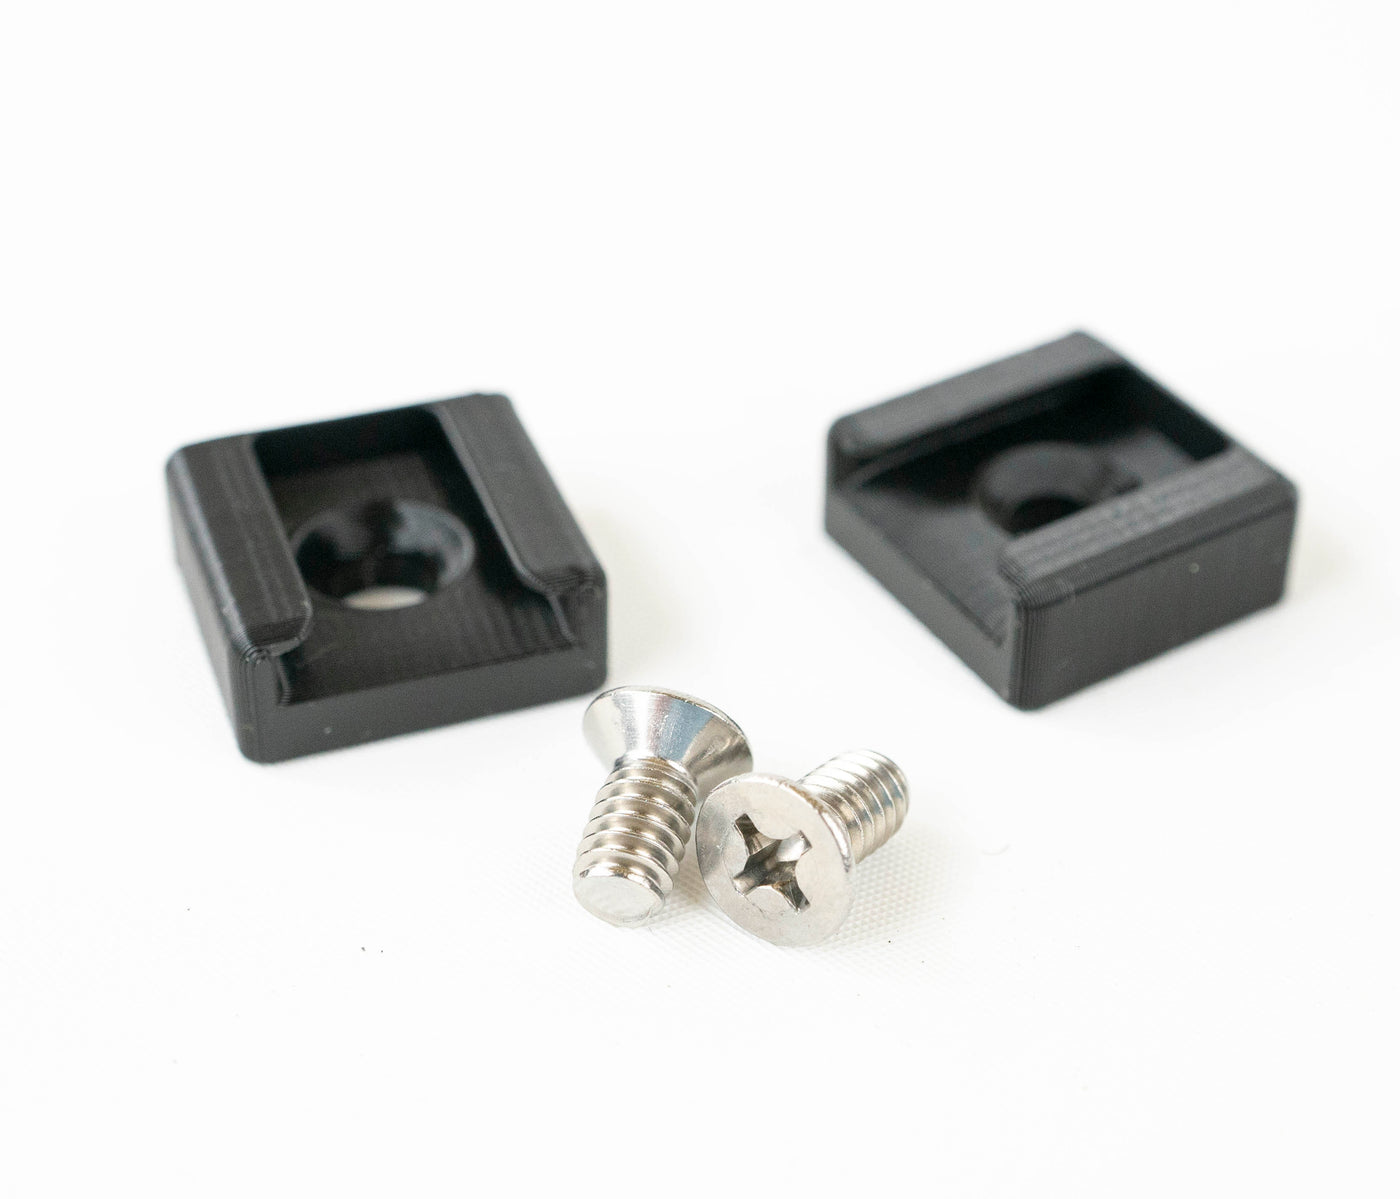 Attachment Kit - Pro - Small Cams